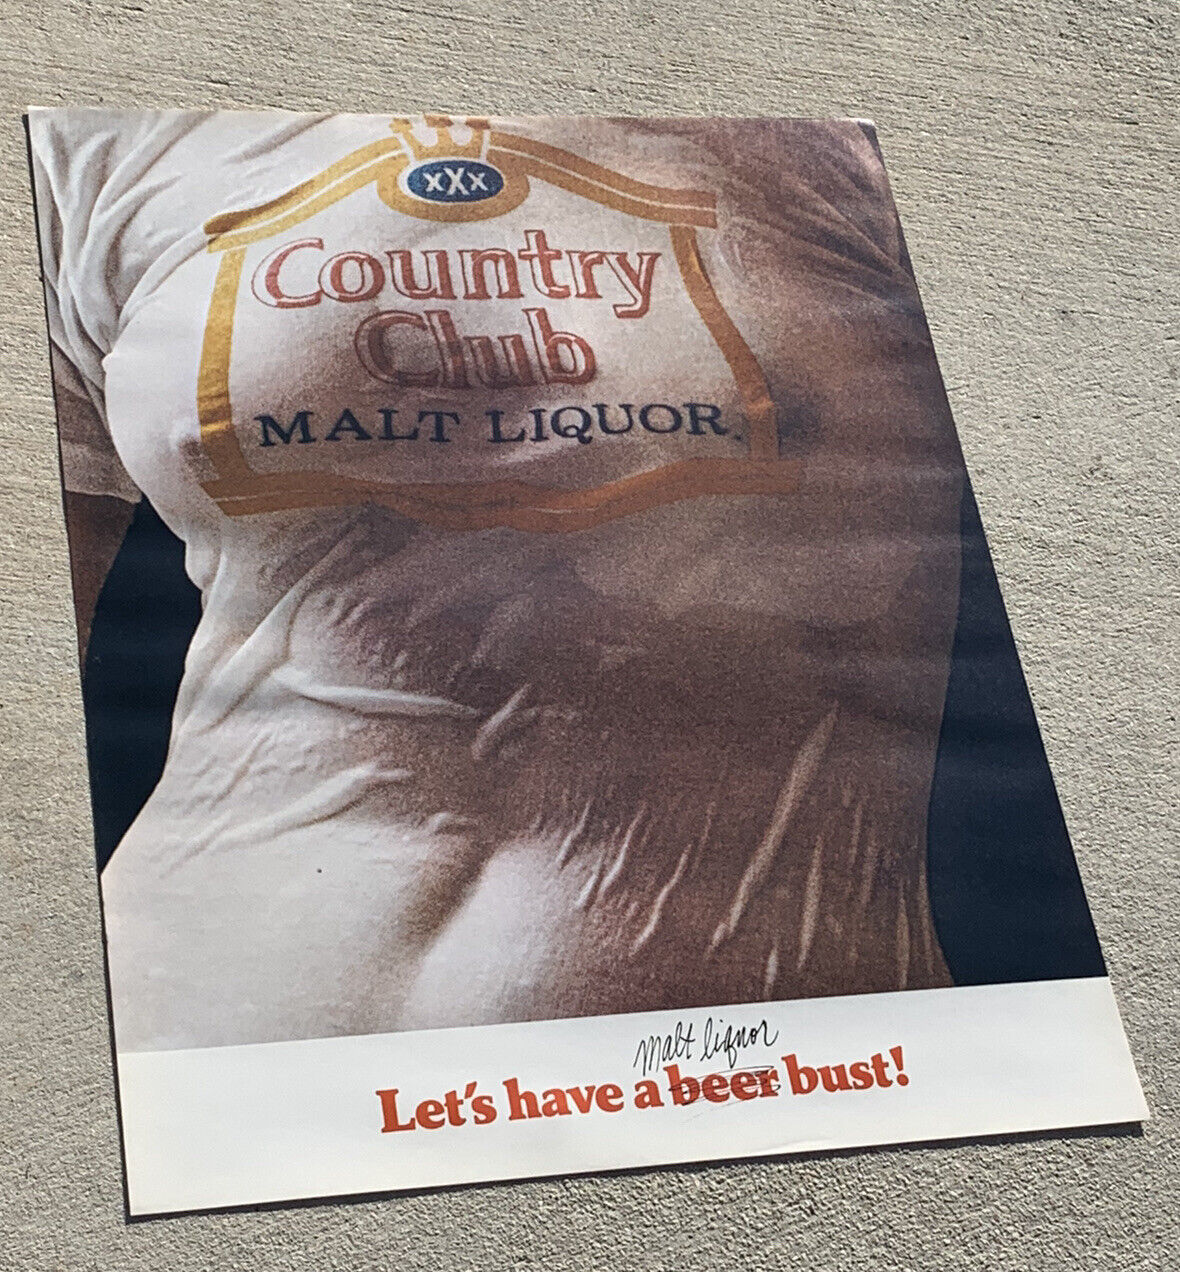 1975 Country club￼ Beer Wet T-Shirt Poster, Goetz by pearl - Original NOS￼